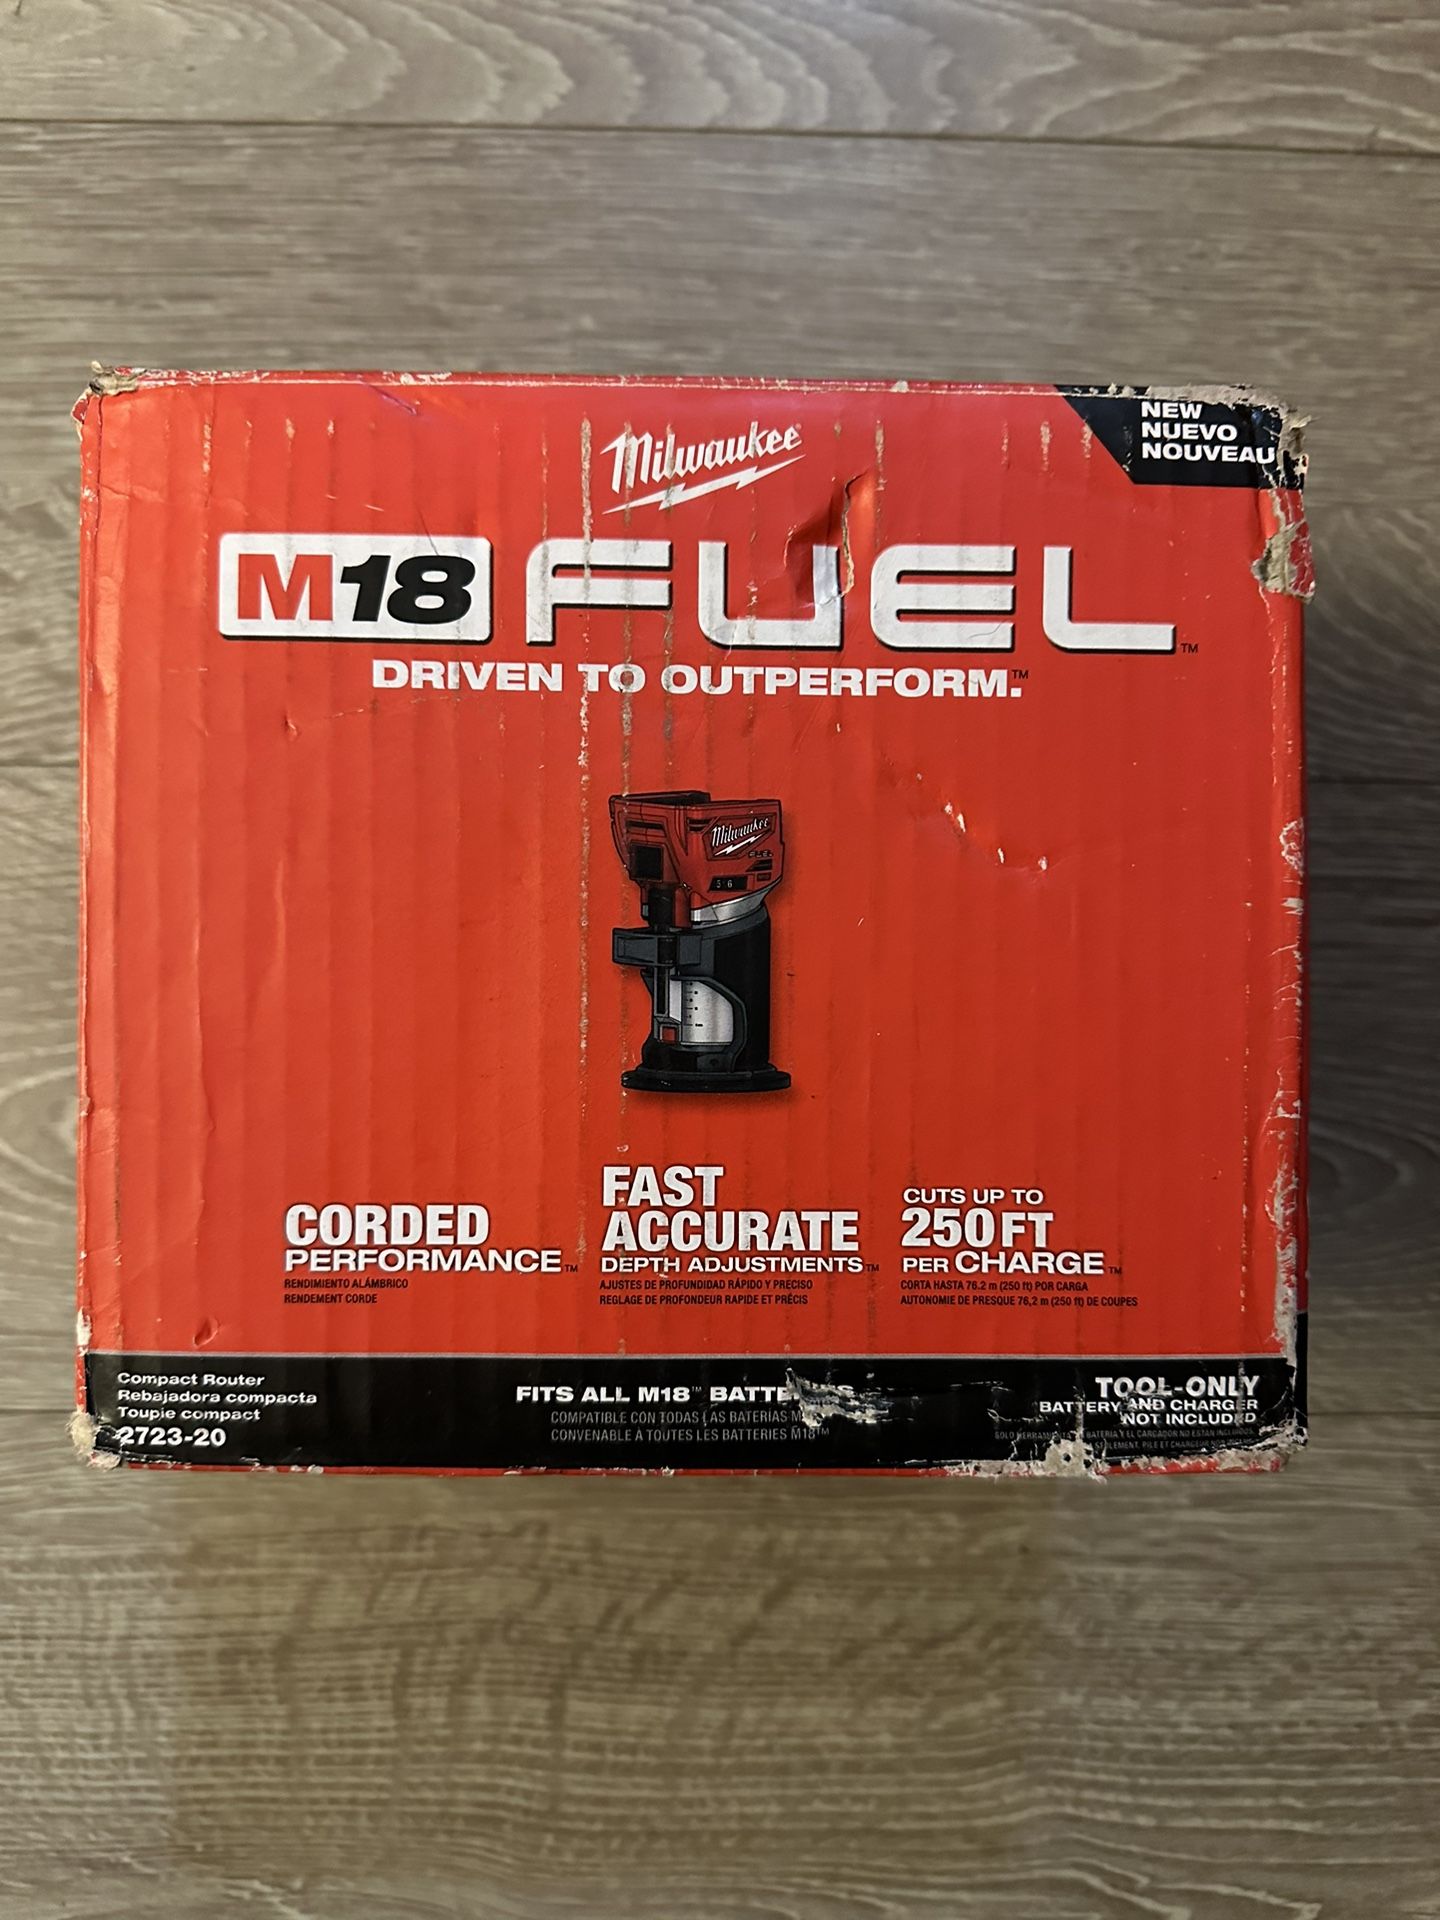 M18 FUEL 18V Lithium-Ion Brushless Cordless Compact Router (Tool-Only)